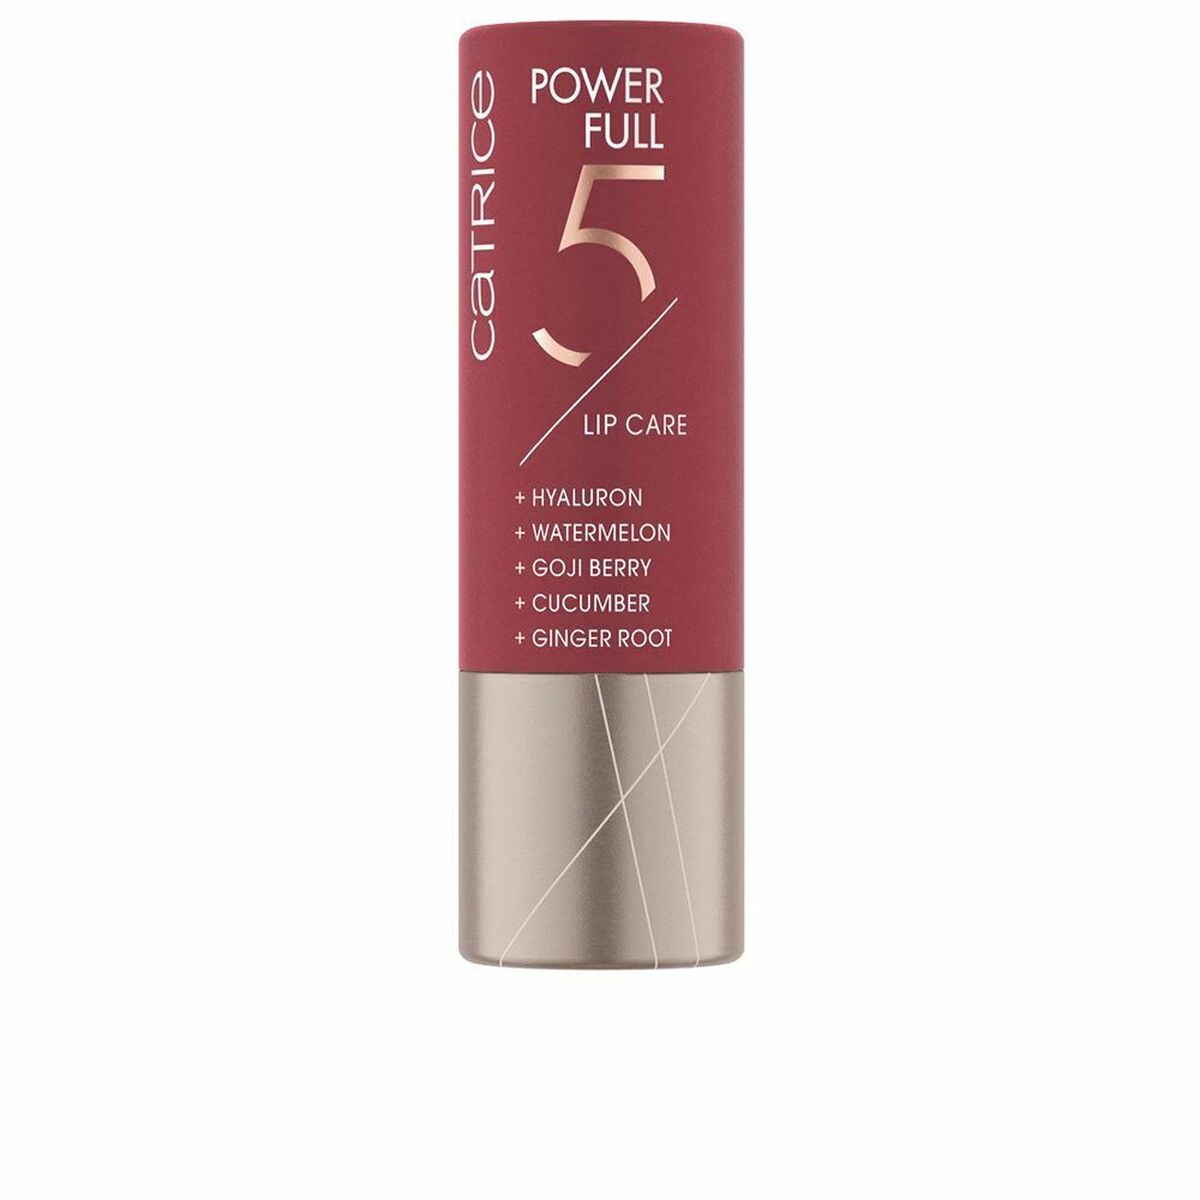 Feuchter Lippenstift Catrice Power Full 5 040-Additioning Cassis (3,5 g)